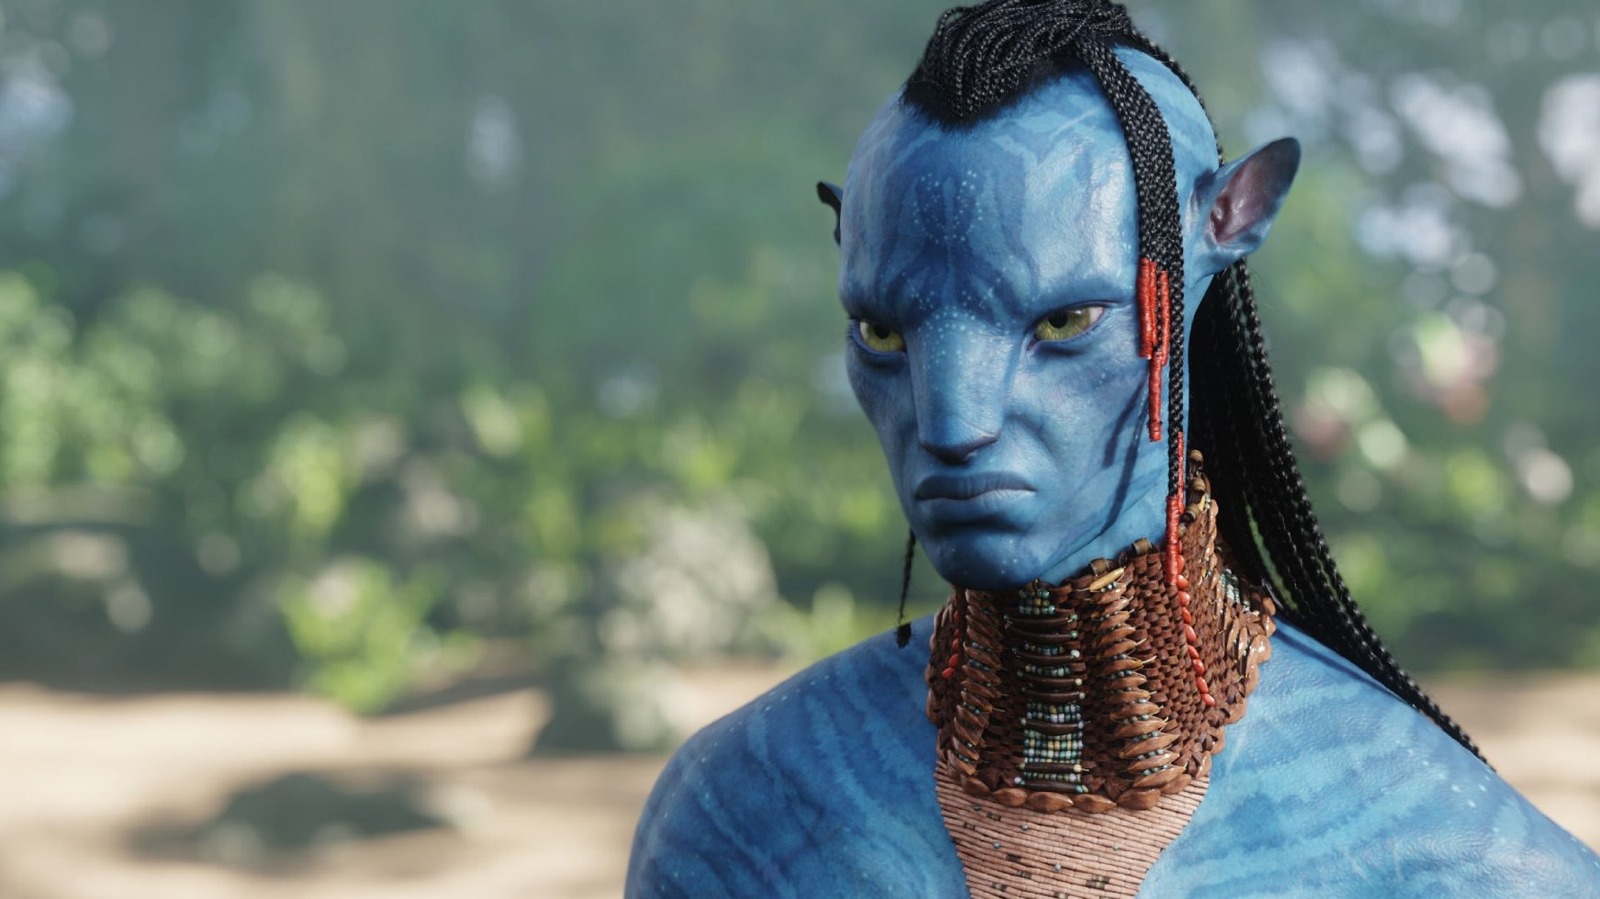 #Avatar’s Mocap Tech Caused Some (Literal) Headaches For The Cast